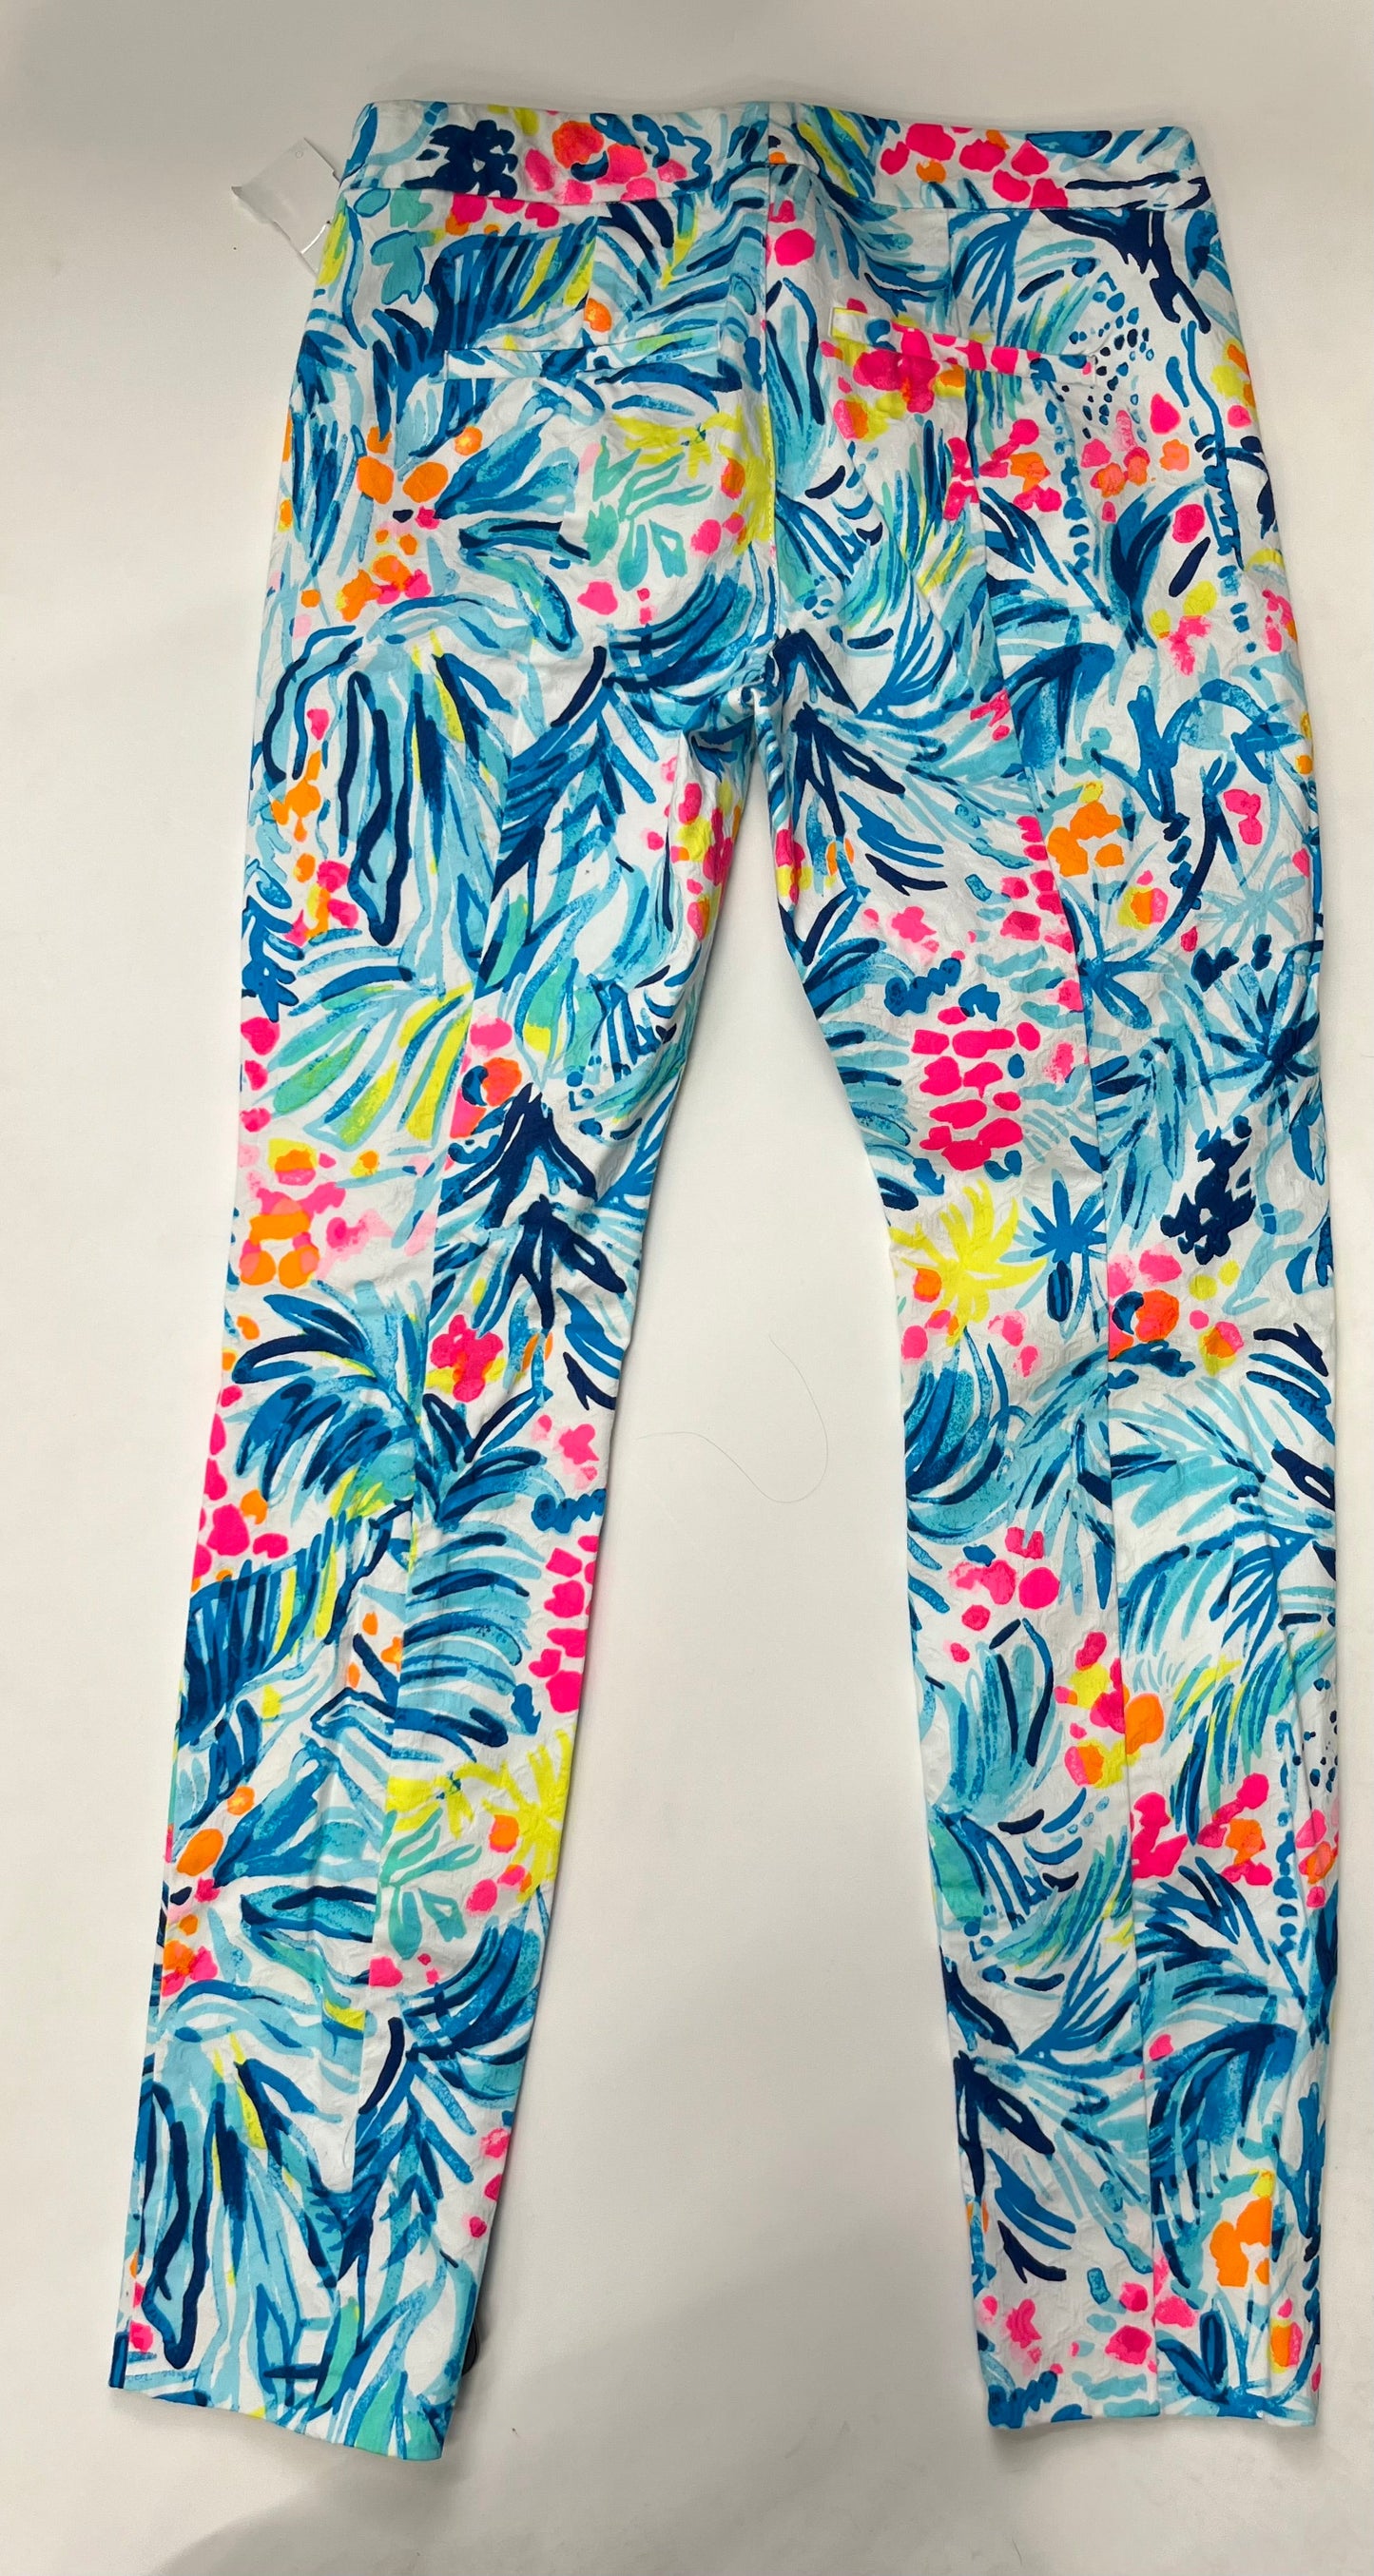 Pants Work/dress By Lilly Pulitzer Size: 4